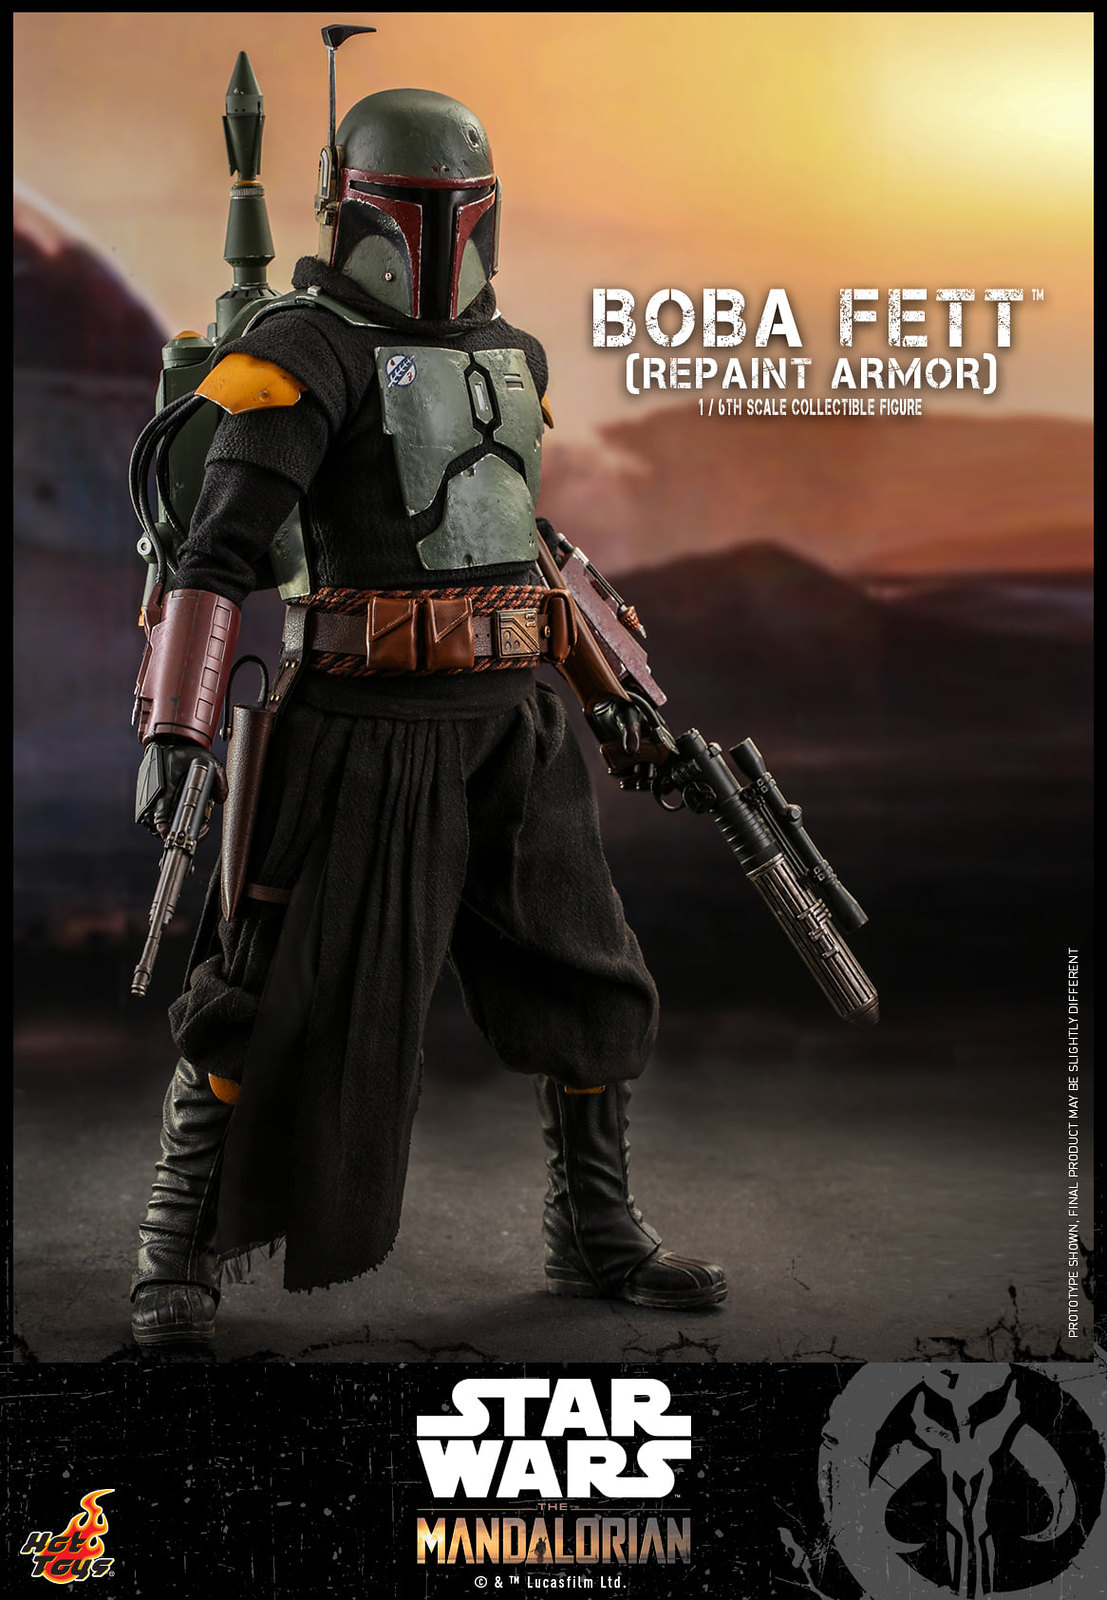 Star Wars: The Mandalorian™ - 1/6th scale Boba Fett™ (Repaint Armor) Collectible figure/ figure and Throne Collectible Set 51311290261_0603acec8f_h